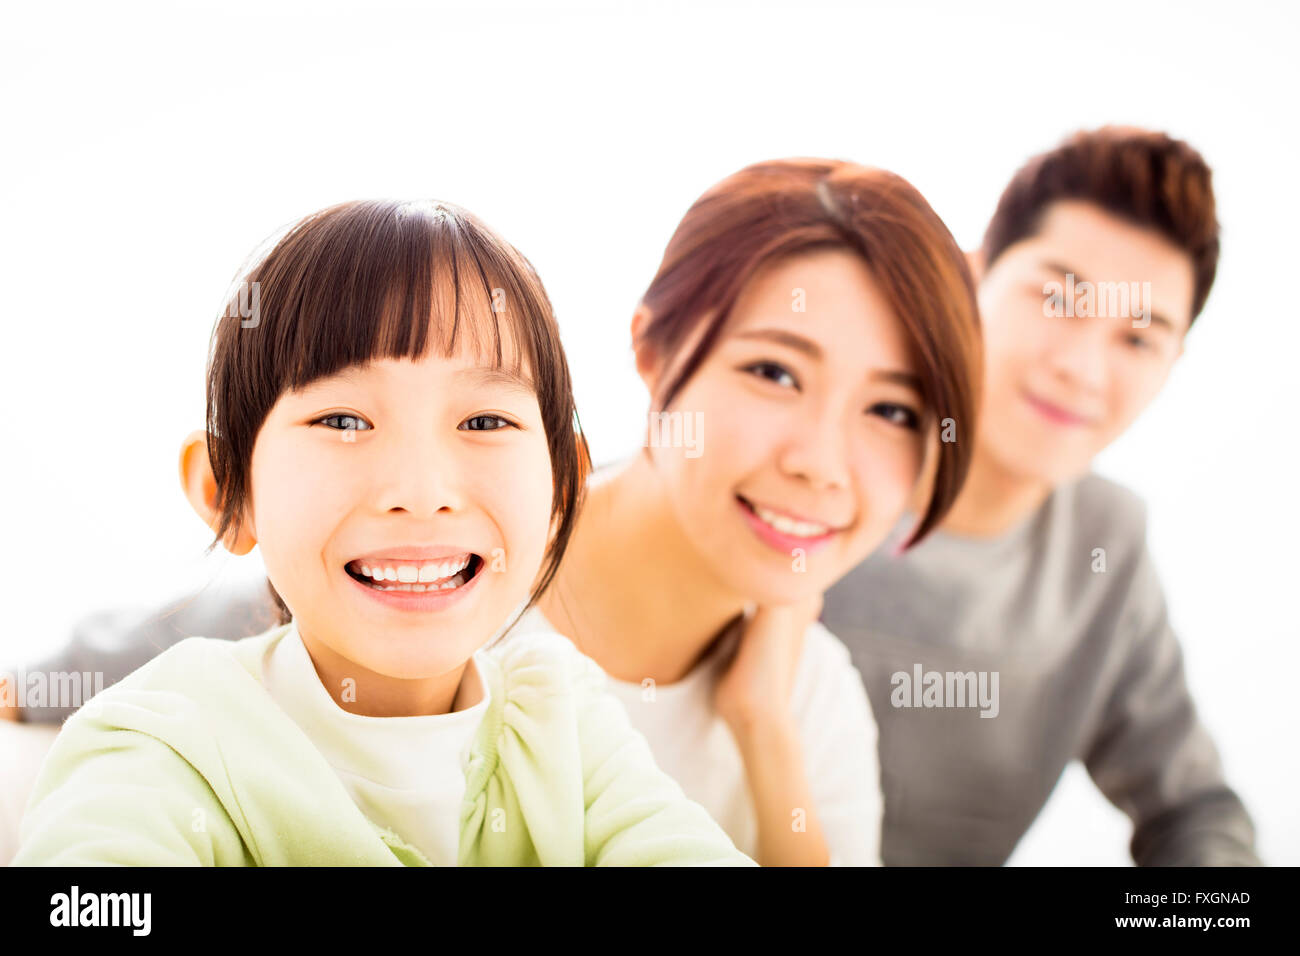 Happy Attractive Young  Family Portrait Stock Photo